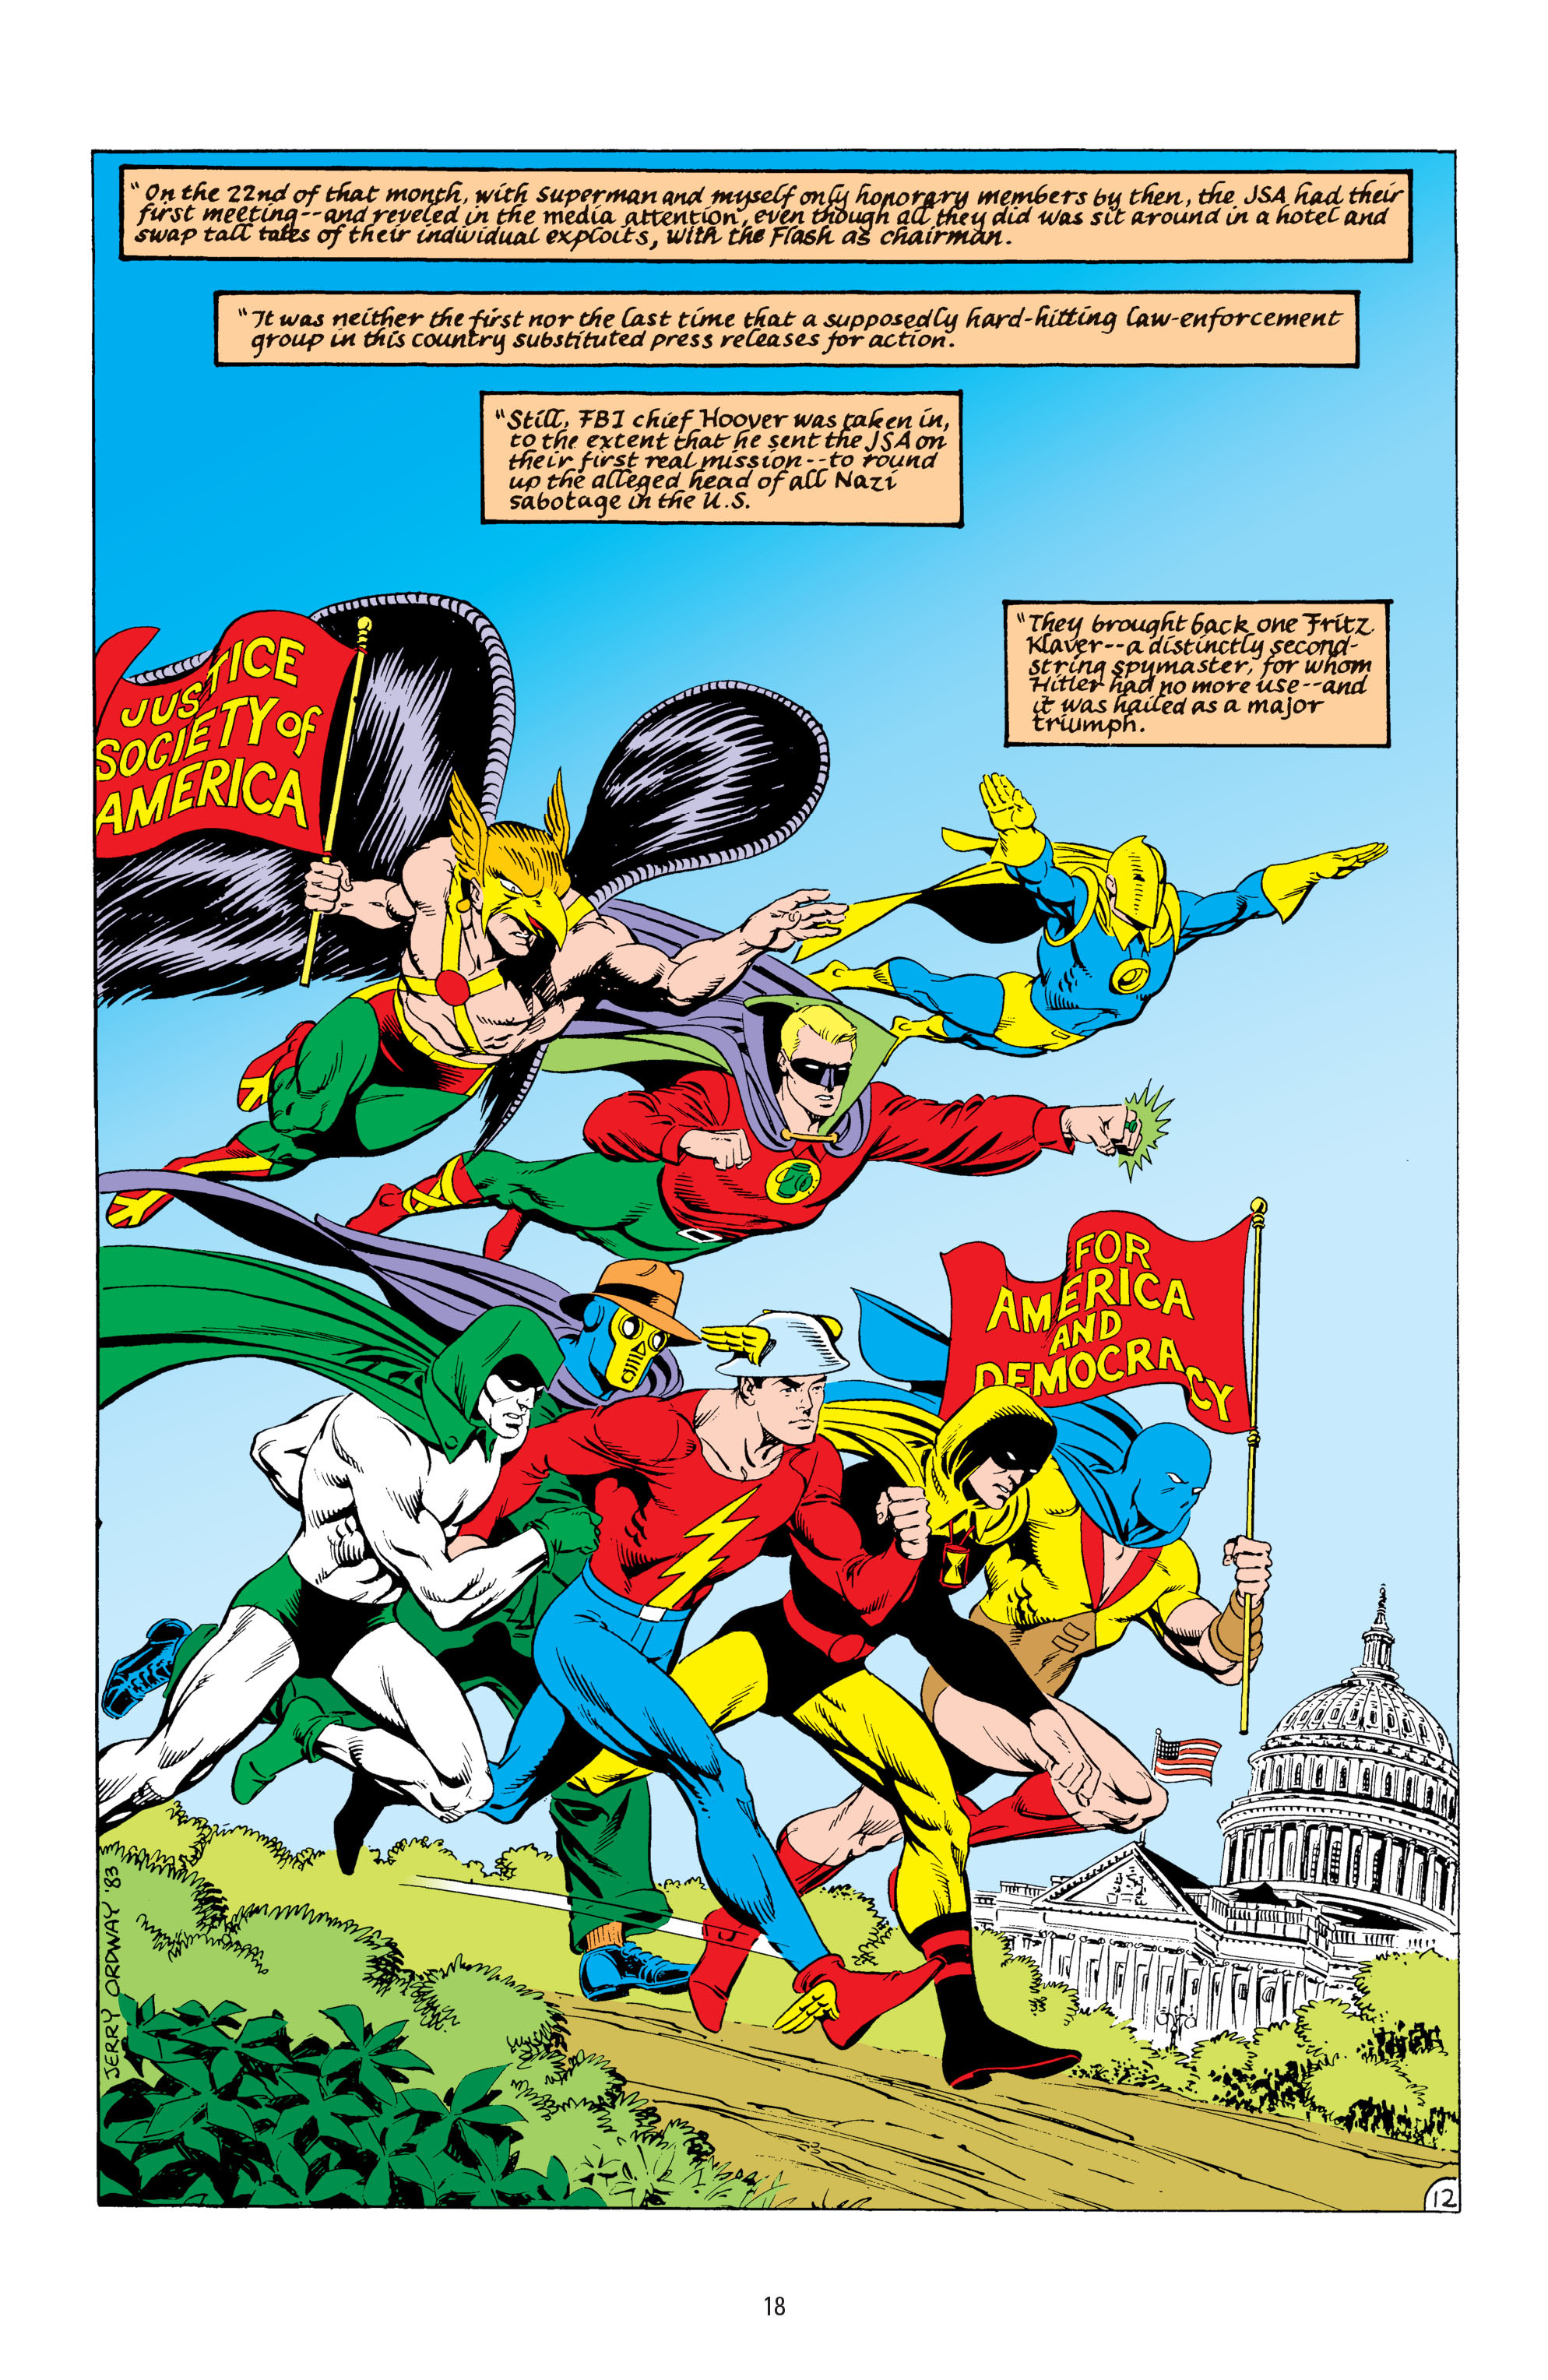 Read online America vs. the Justice Society comic -  Issue # TPB - 18